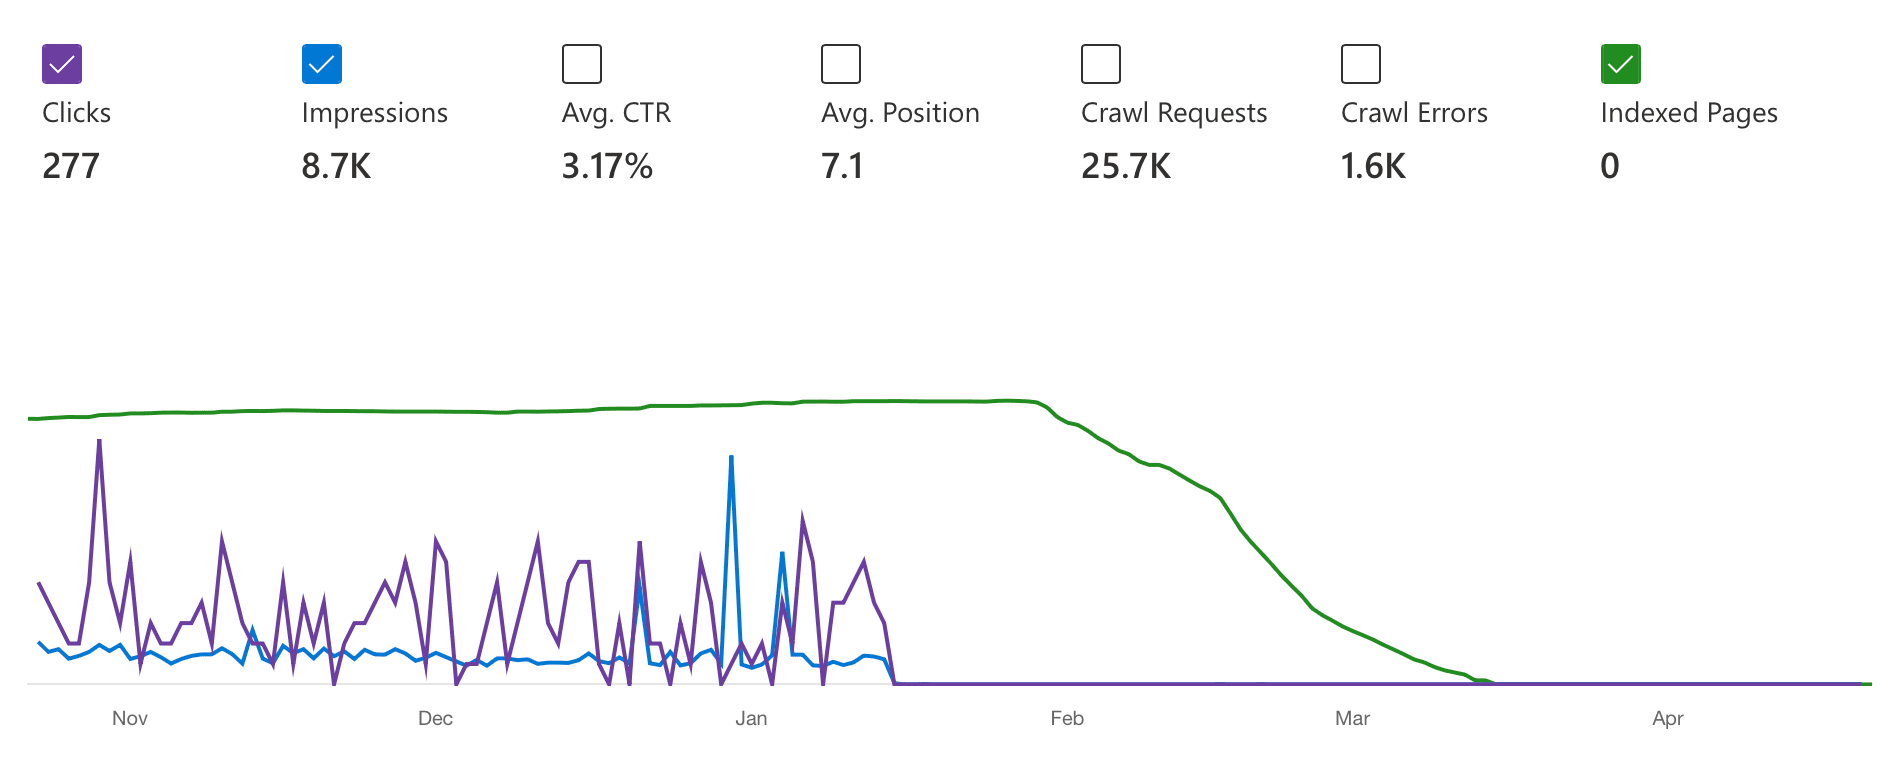 My website Bing Search Performance over last 6 months